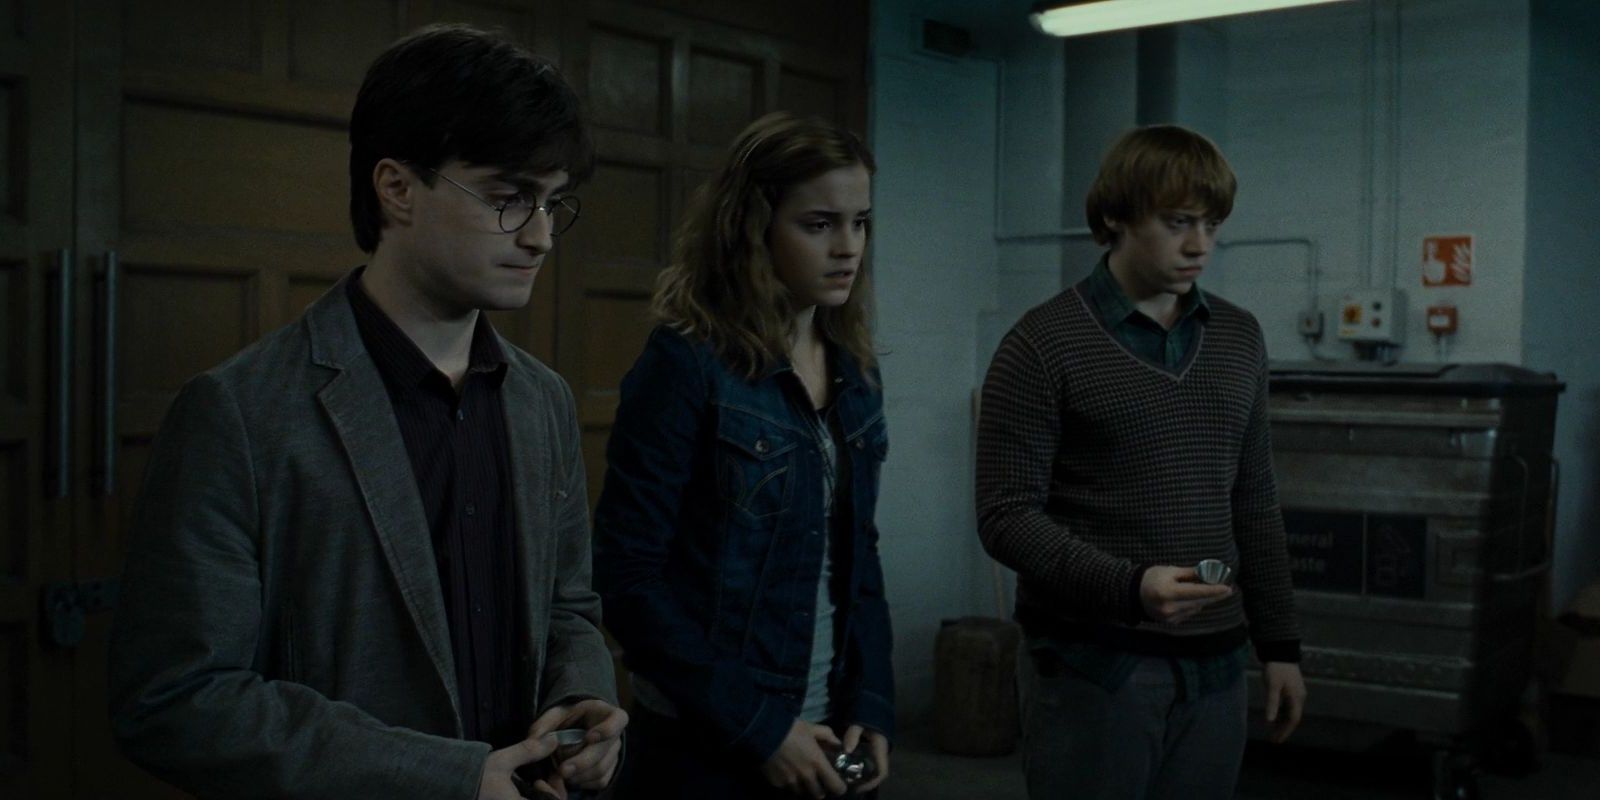 Harry, Ron, and Hermione in a cafe in Deathly Hallows 